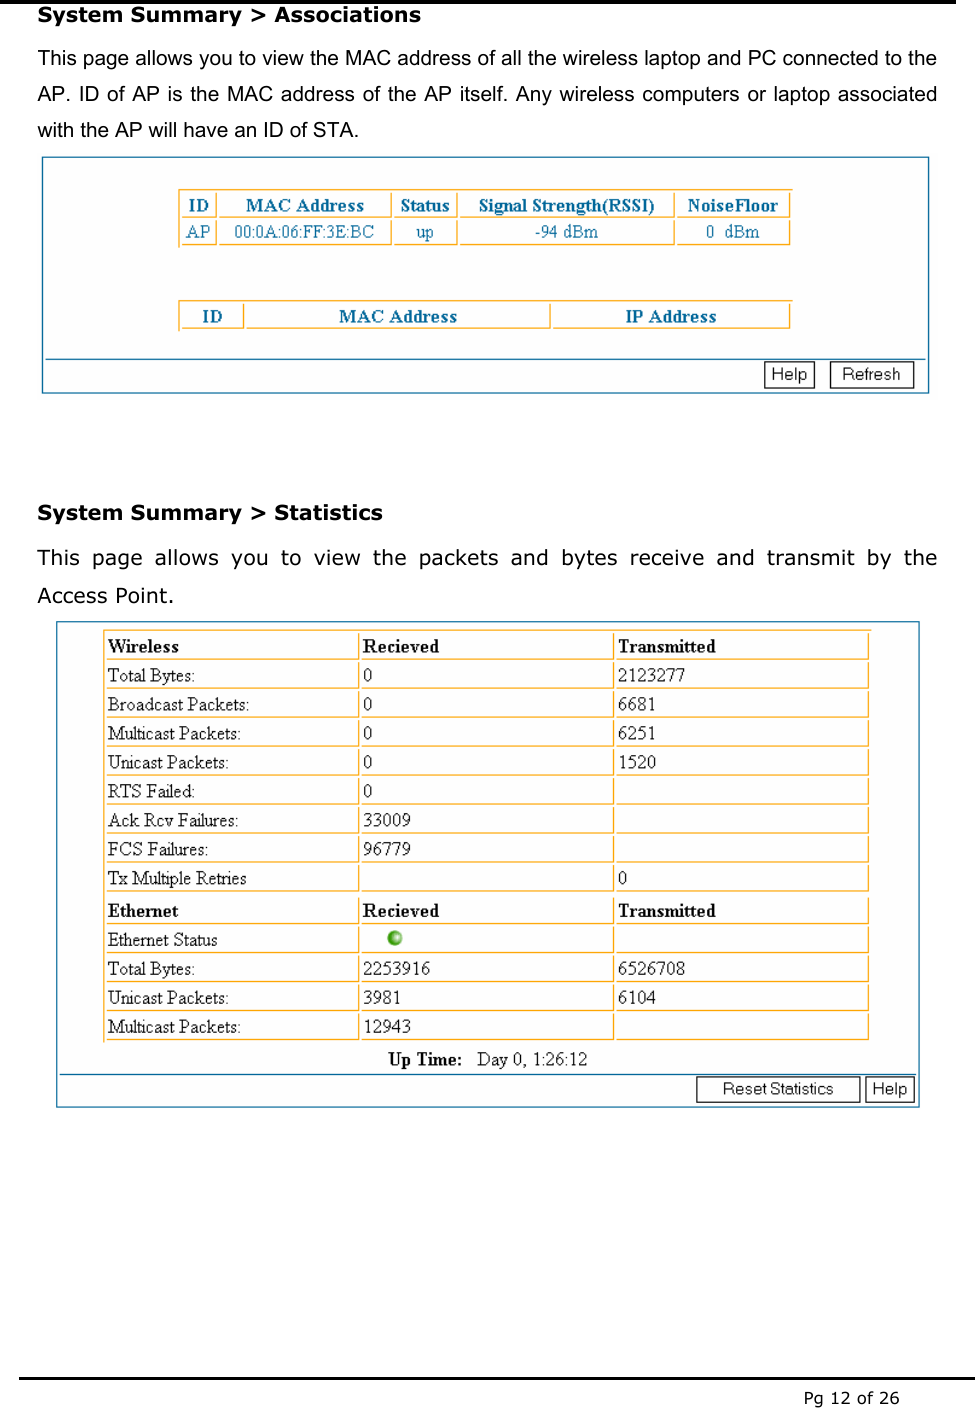  Pg 12 of 26 System Summary &gt; Associations This page allows you to view the MAC address of all the wireless laptop and PC connected to the AP. ID of AP is the MAC address of the AP itself. Any wireless computers or laptop associated with the AP will have an ID of STA.   System Summary &gt; Statistics This page allows you to view the packets and bytes receive and transmit by the Access Point.       